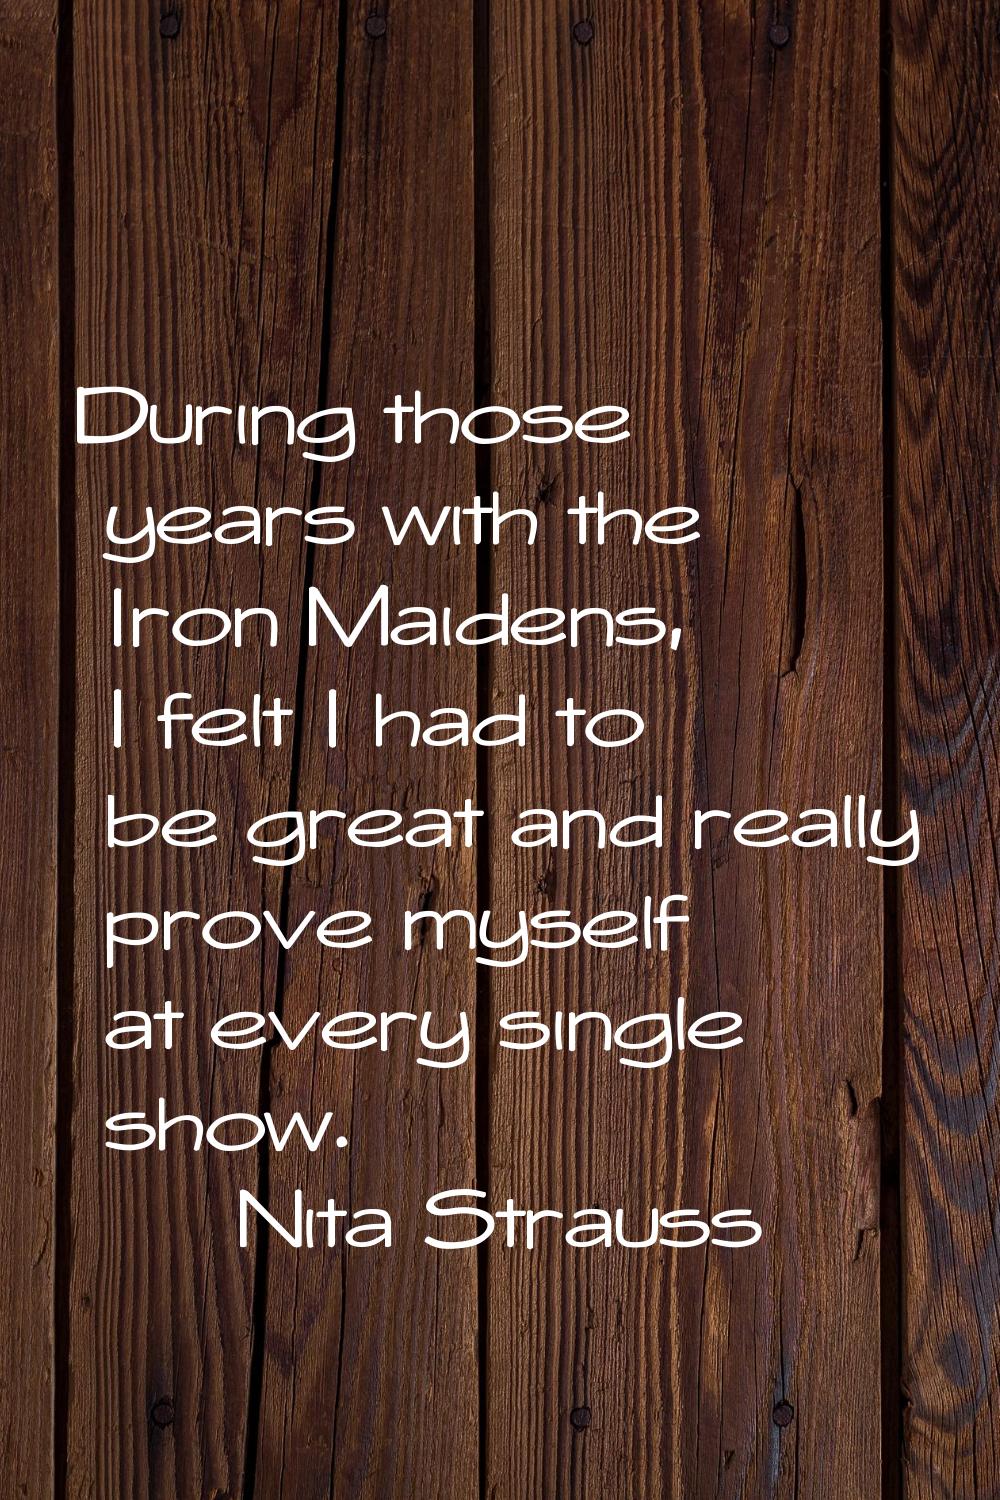 During those years with the Iron Maidens, I felt I had to be great and really prove myself at every